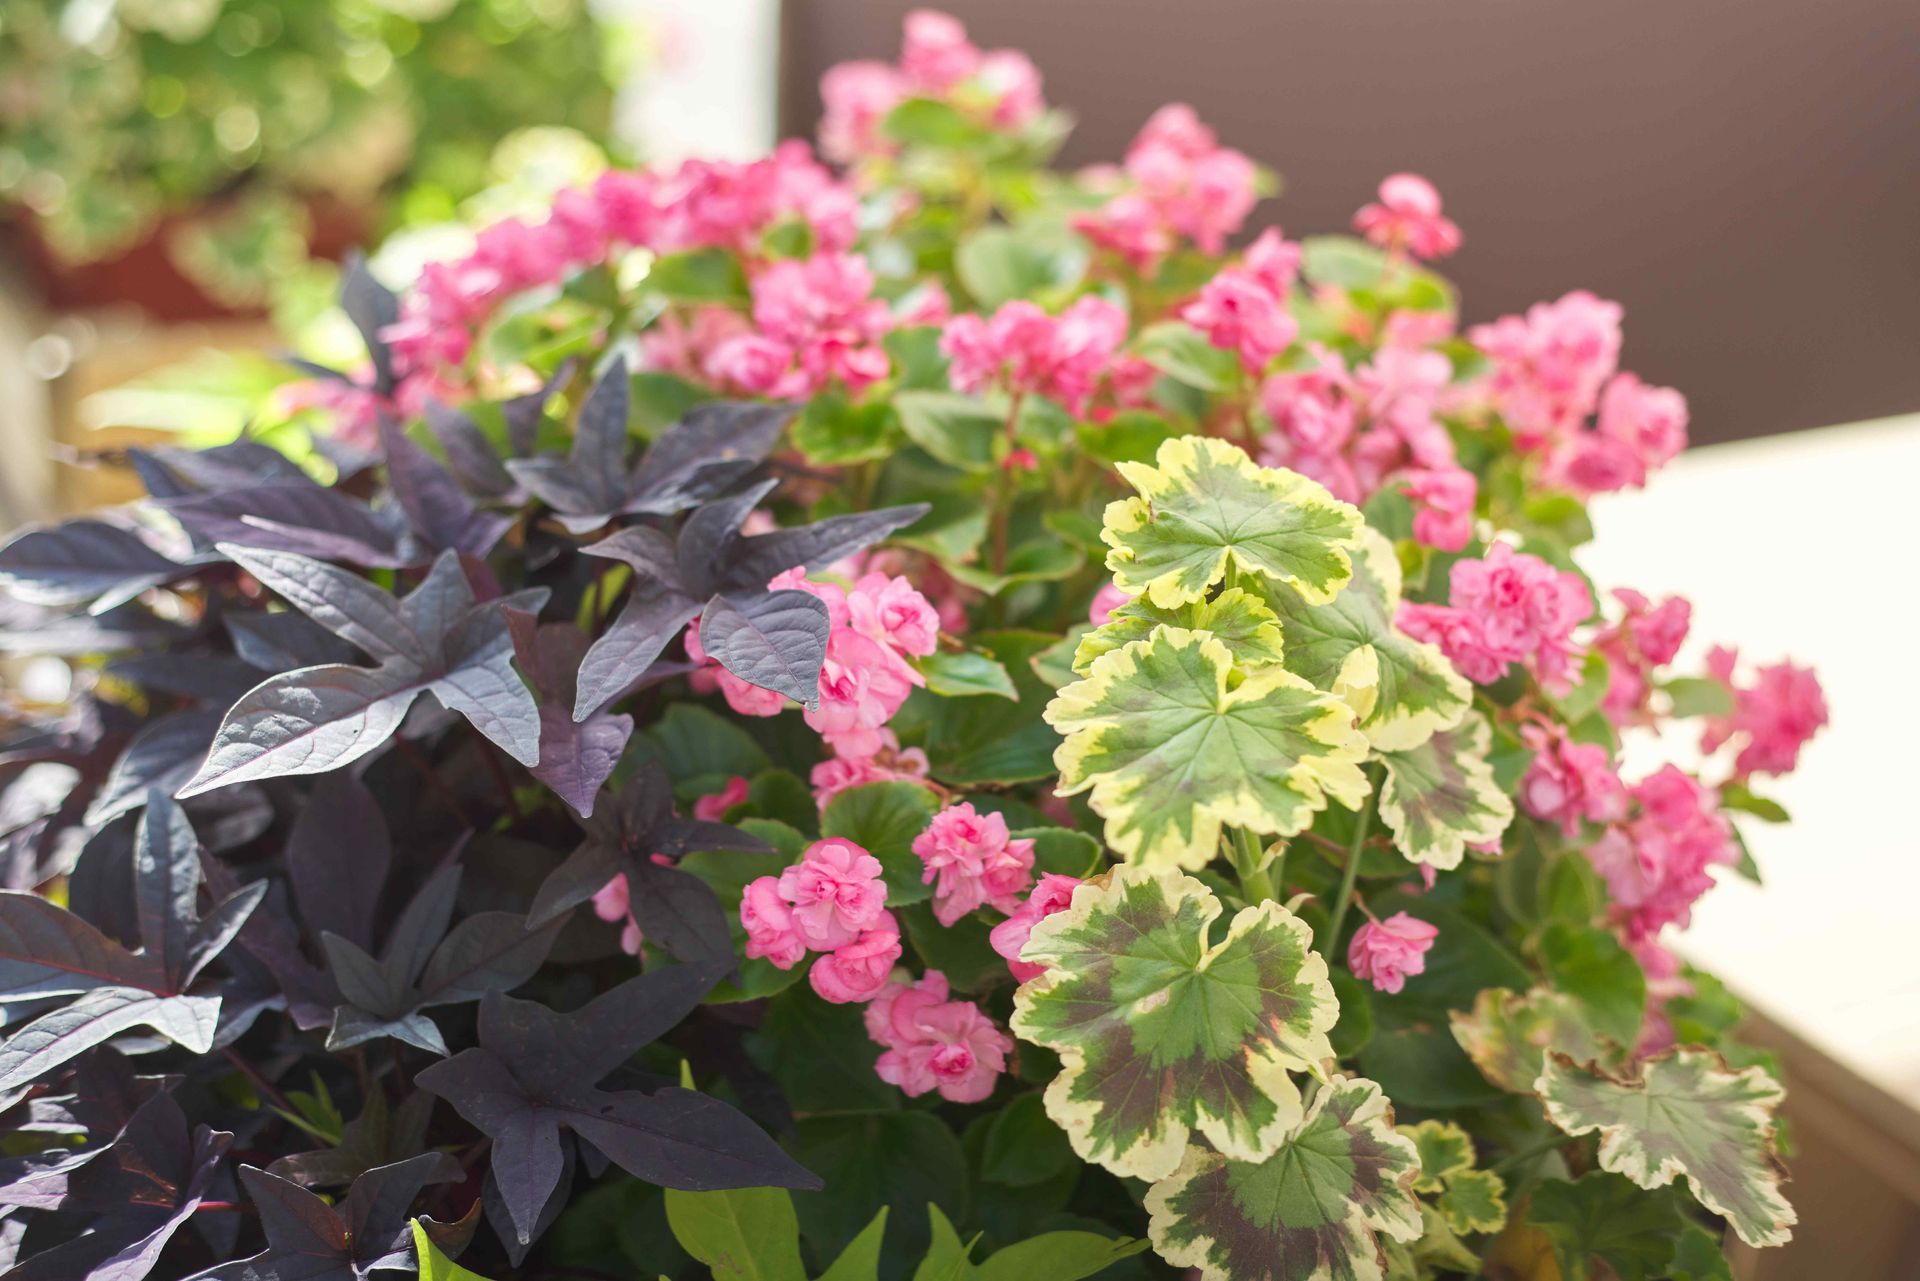 Affordable Flower Bed with Pink Blooms and Green Leaves